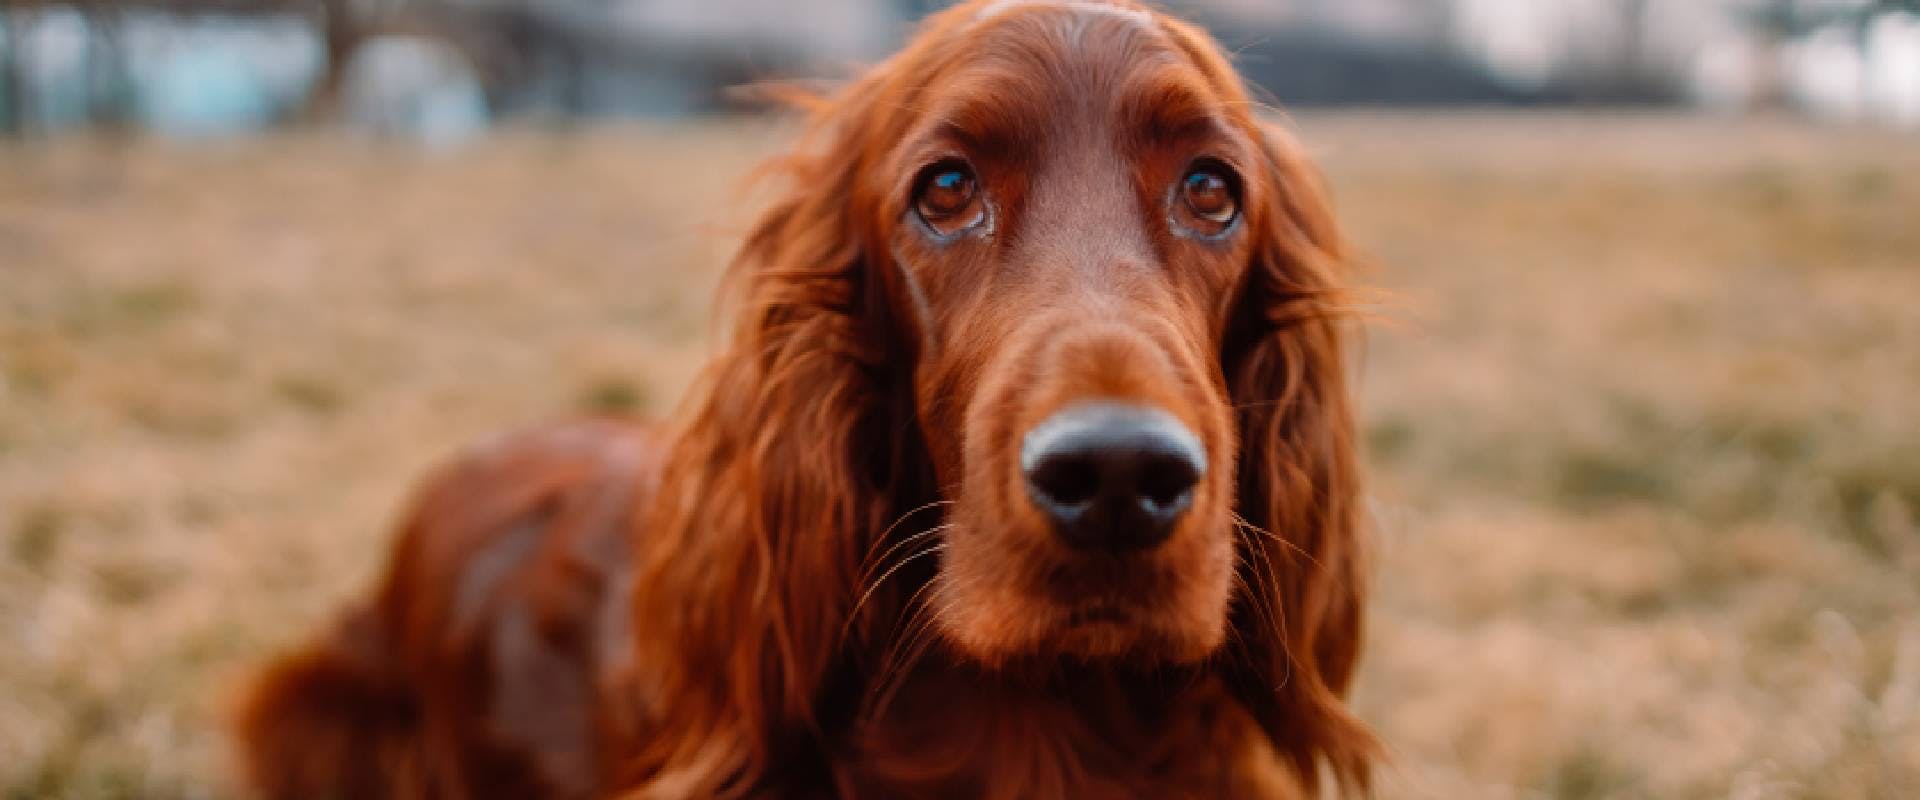 Irish Doodle parent: Red Setter dog looking at the camera